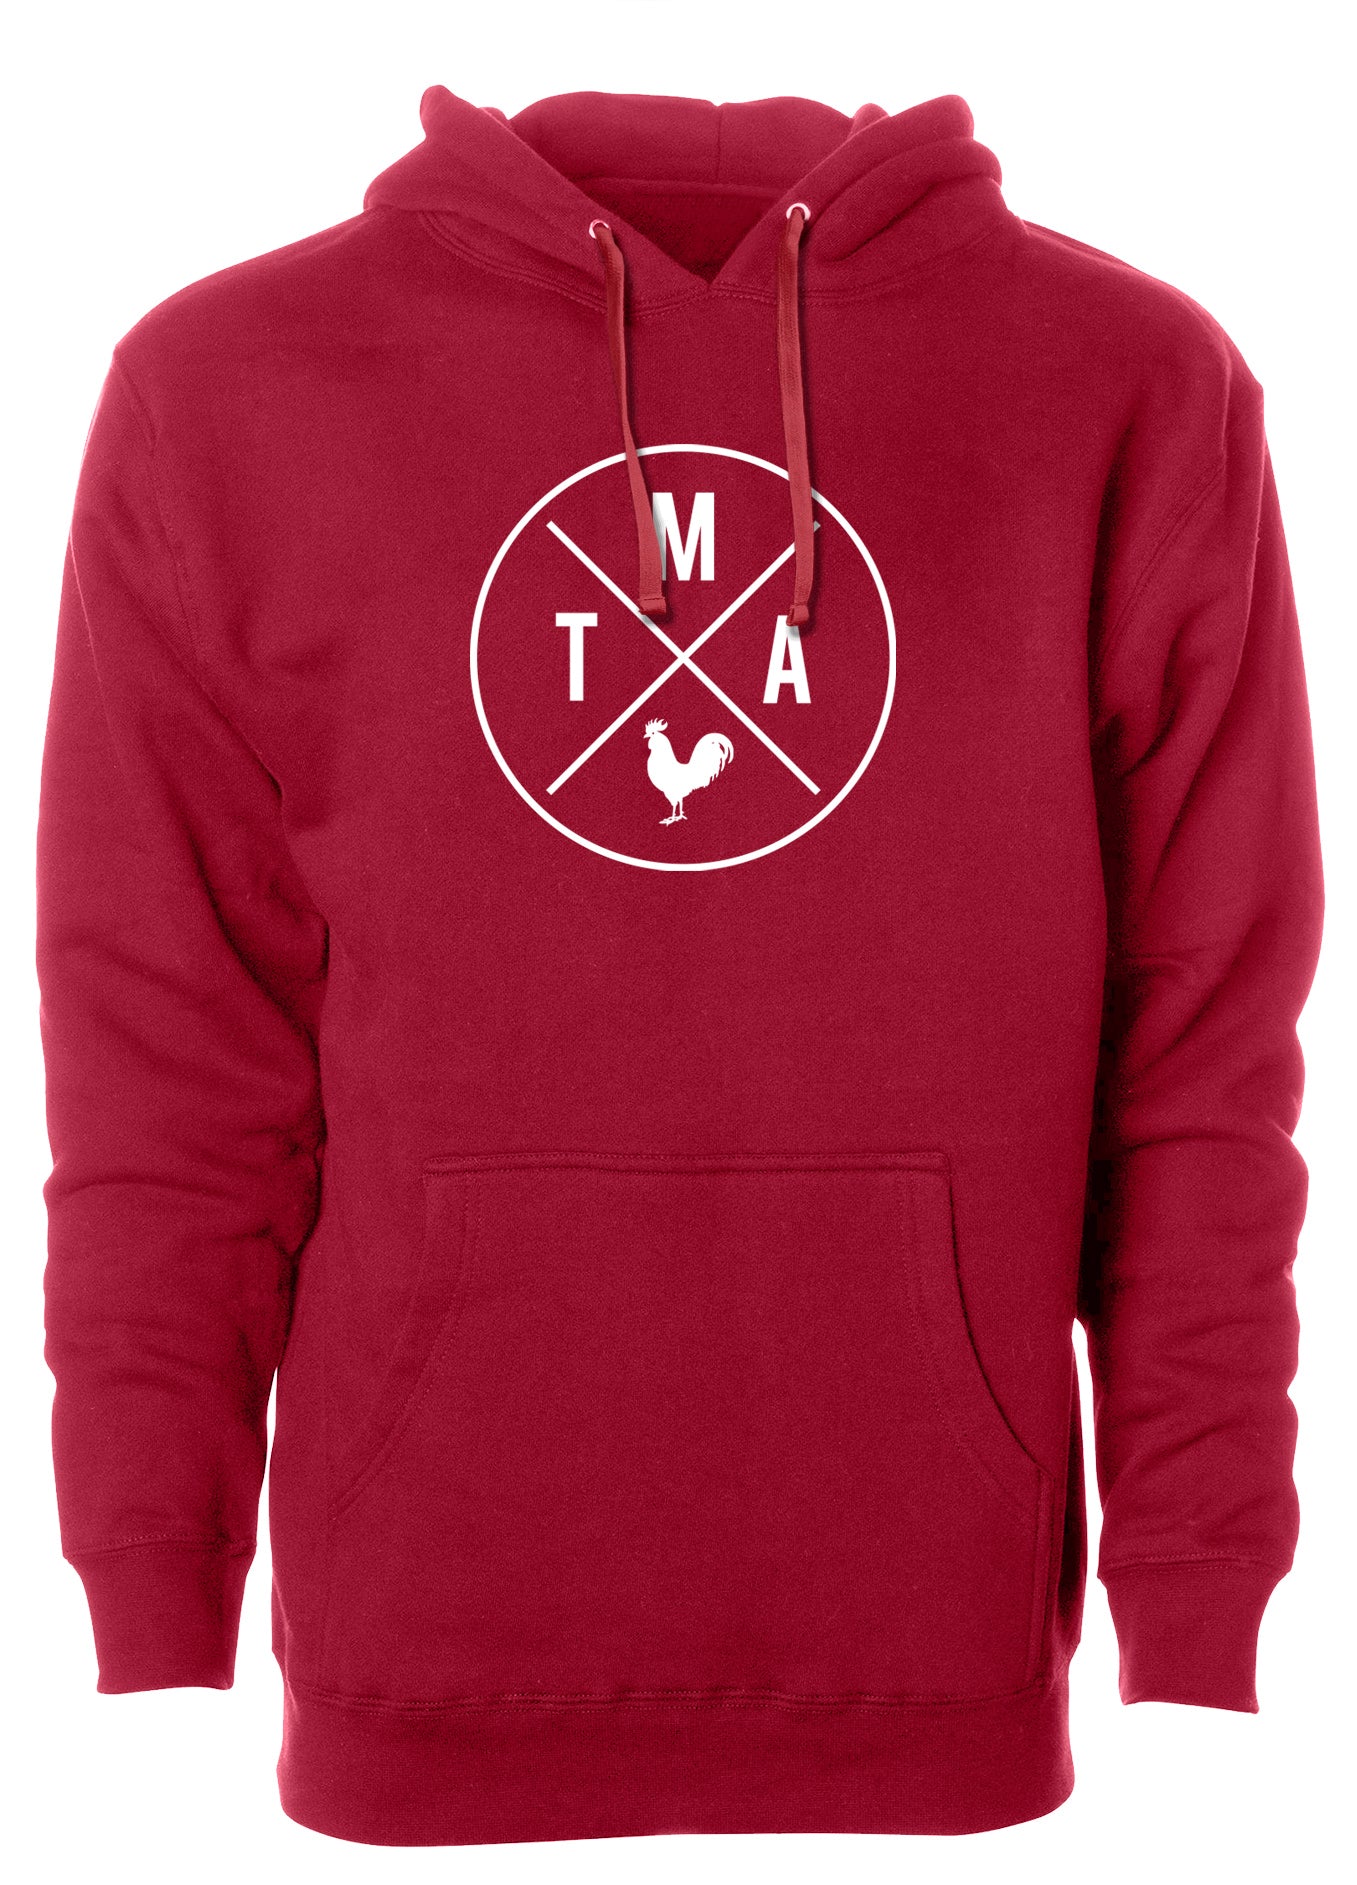 tma classic logo the morning after hoodie sweatshirt stl st louis apparel